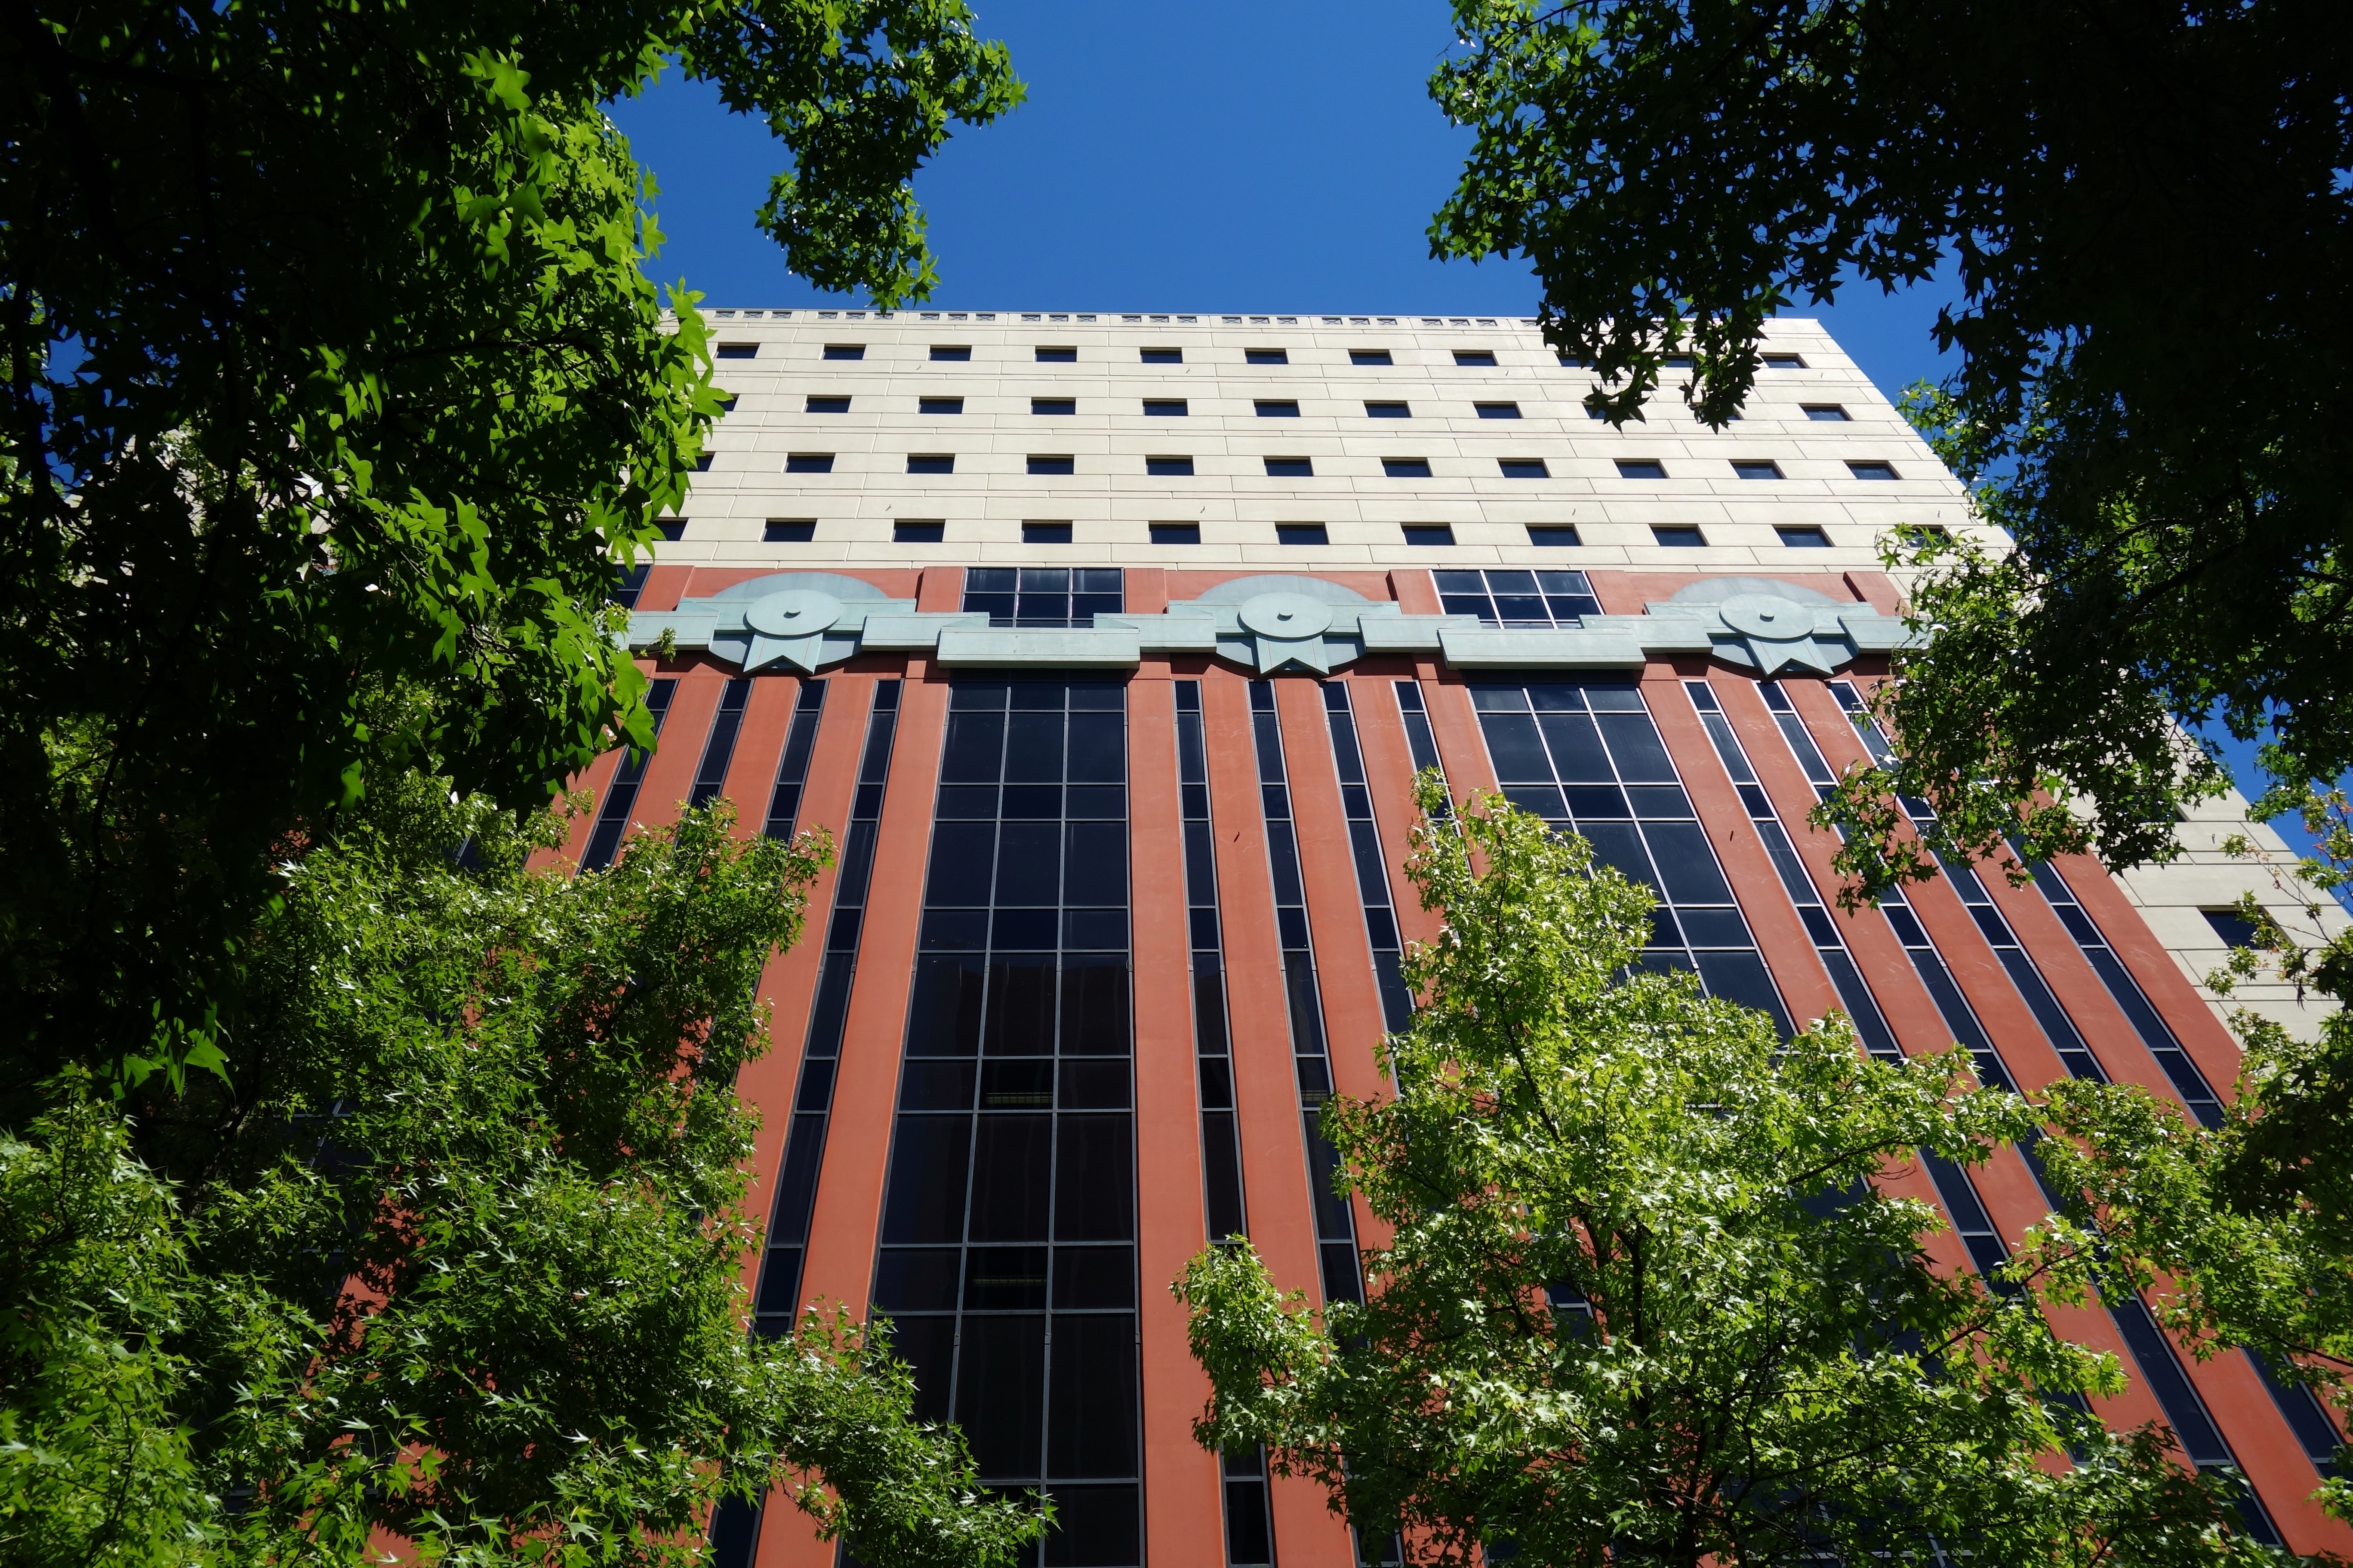 The exterior of a postmodern Portland building. The facade is red and white. There are trees in the foreground.